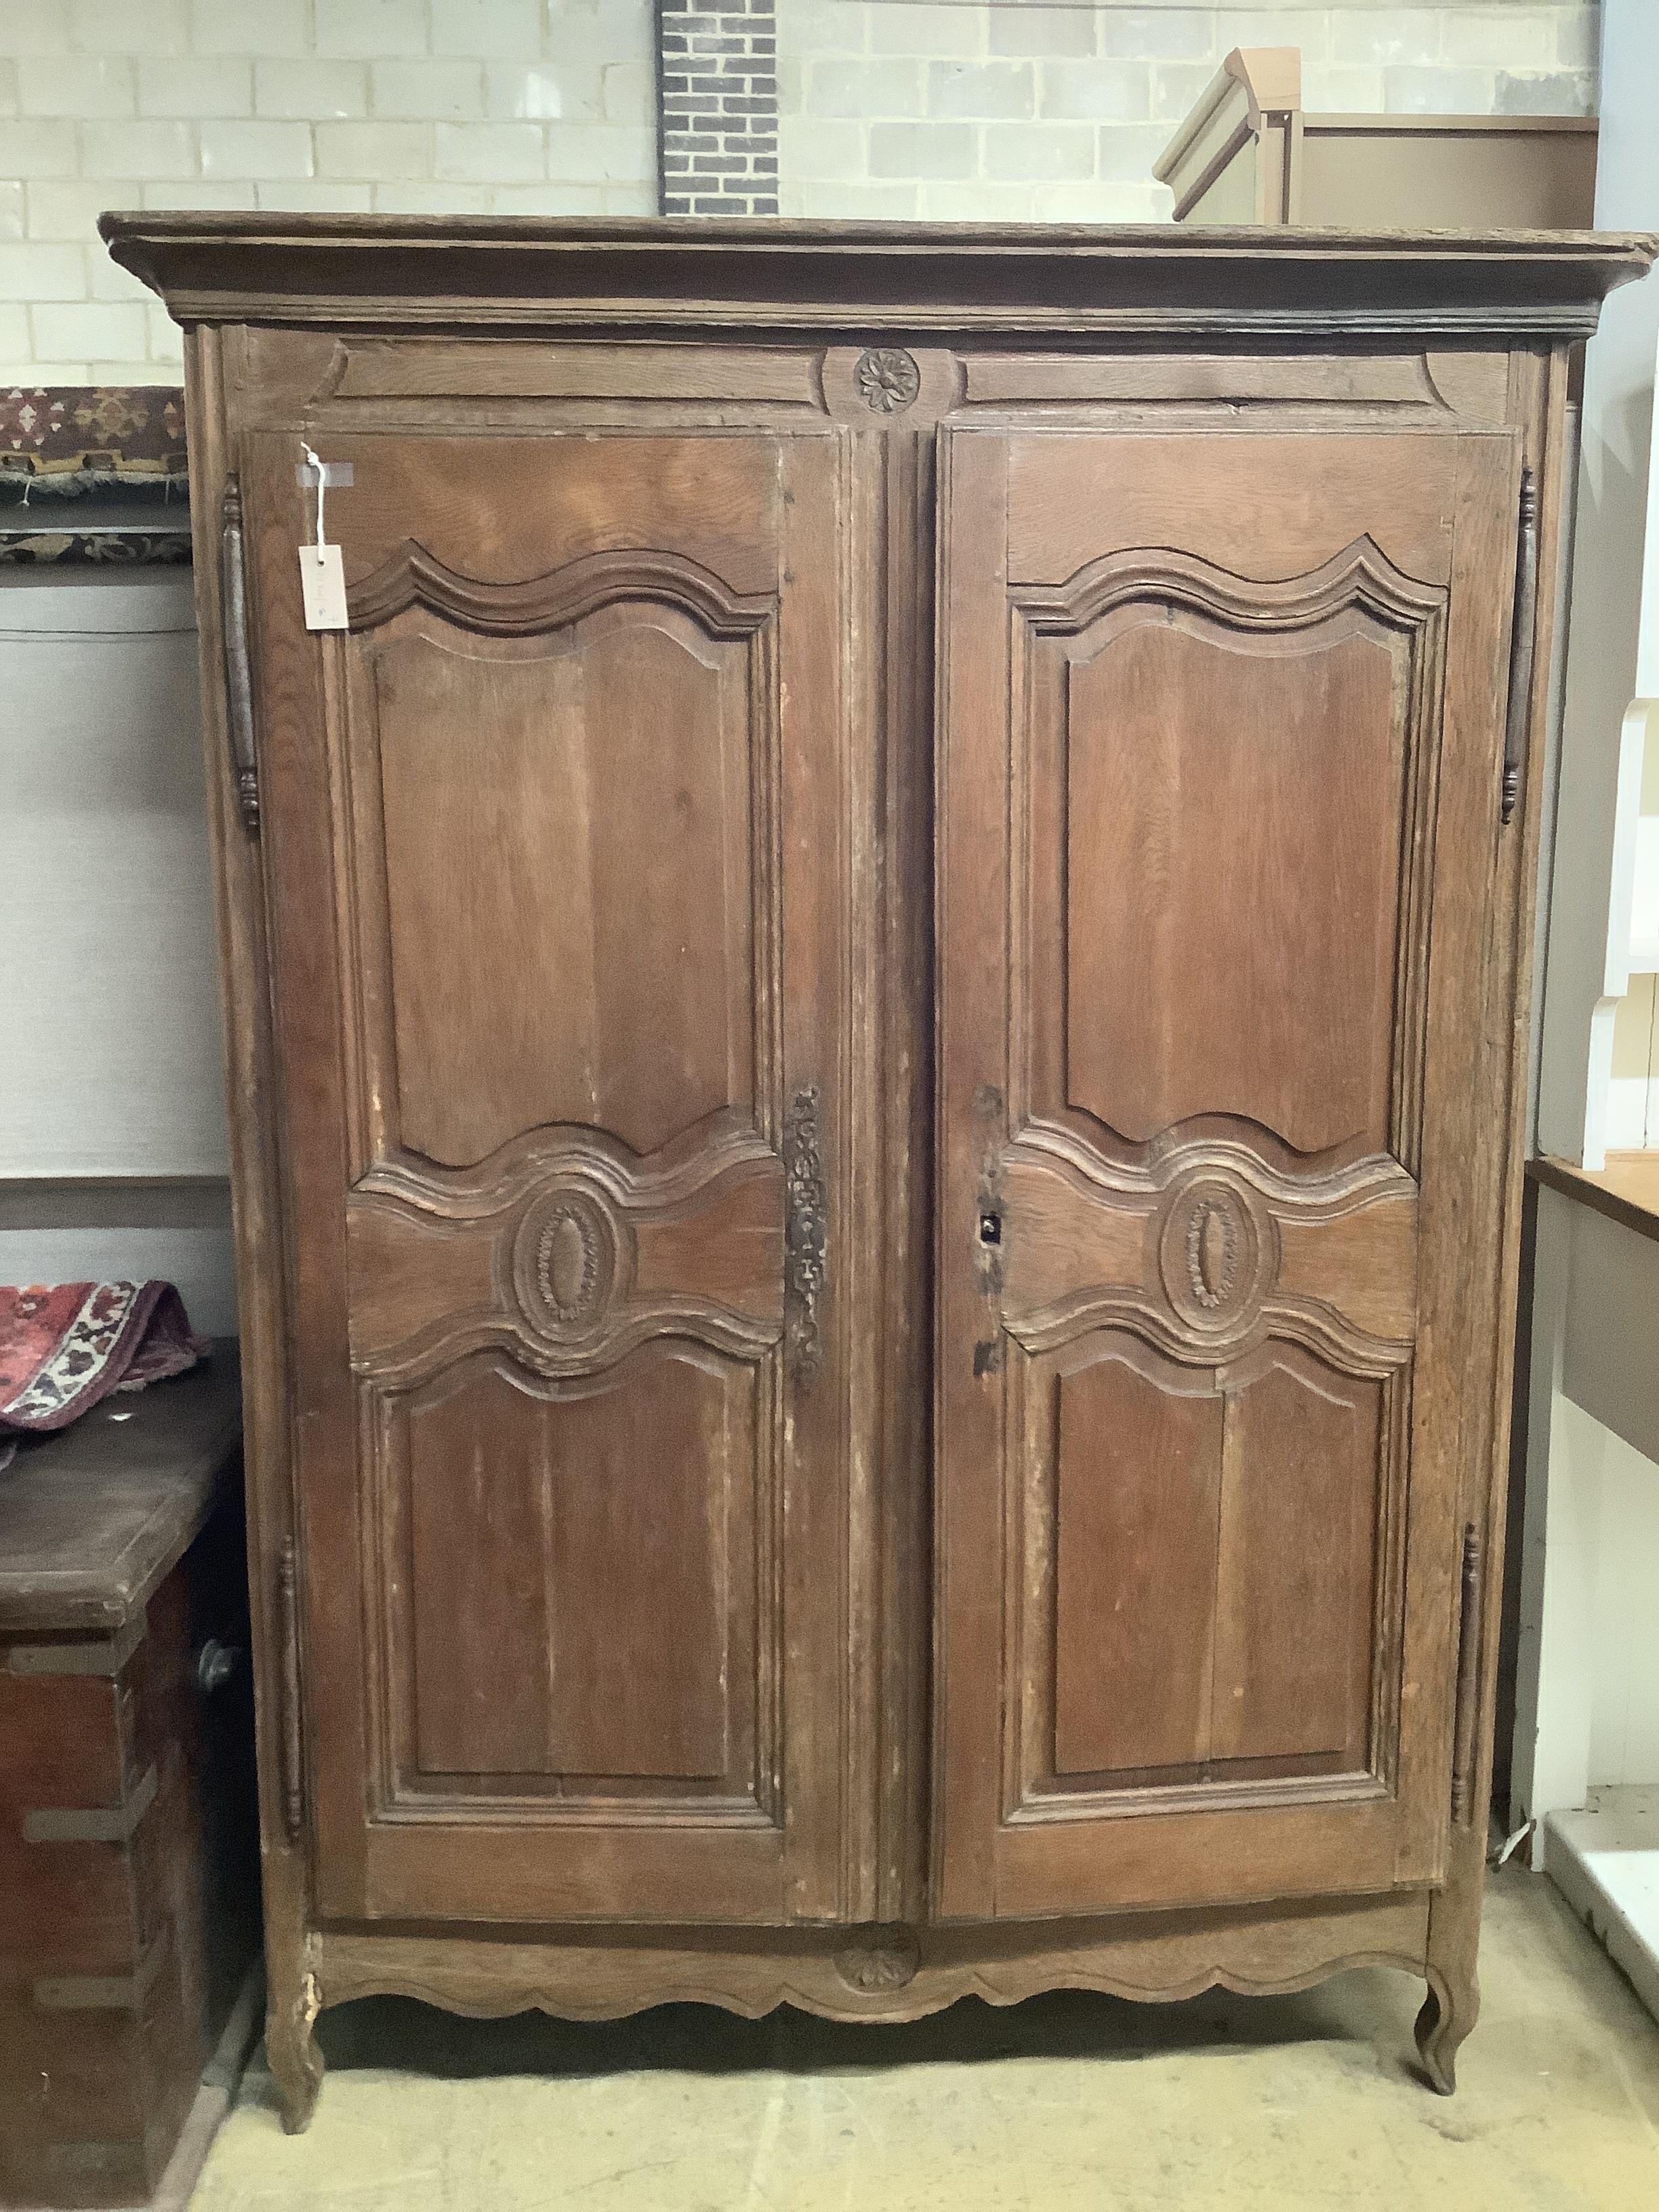 A late 18th / early 19th century French oak armoire, width 134cm, depth 56cm, height 184cm